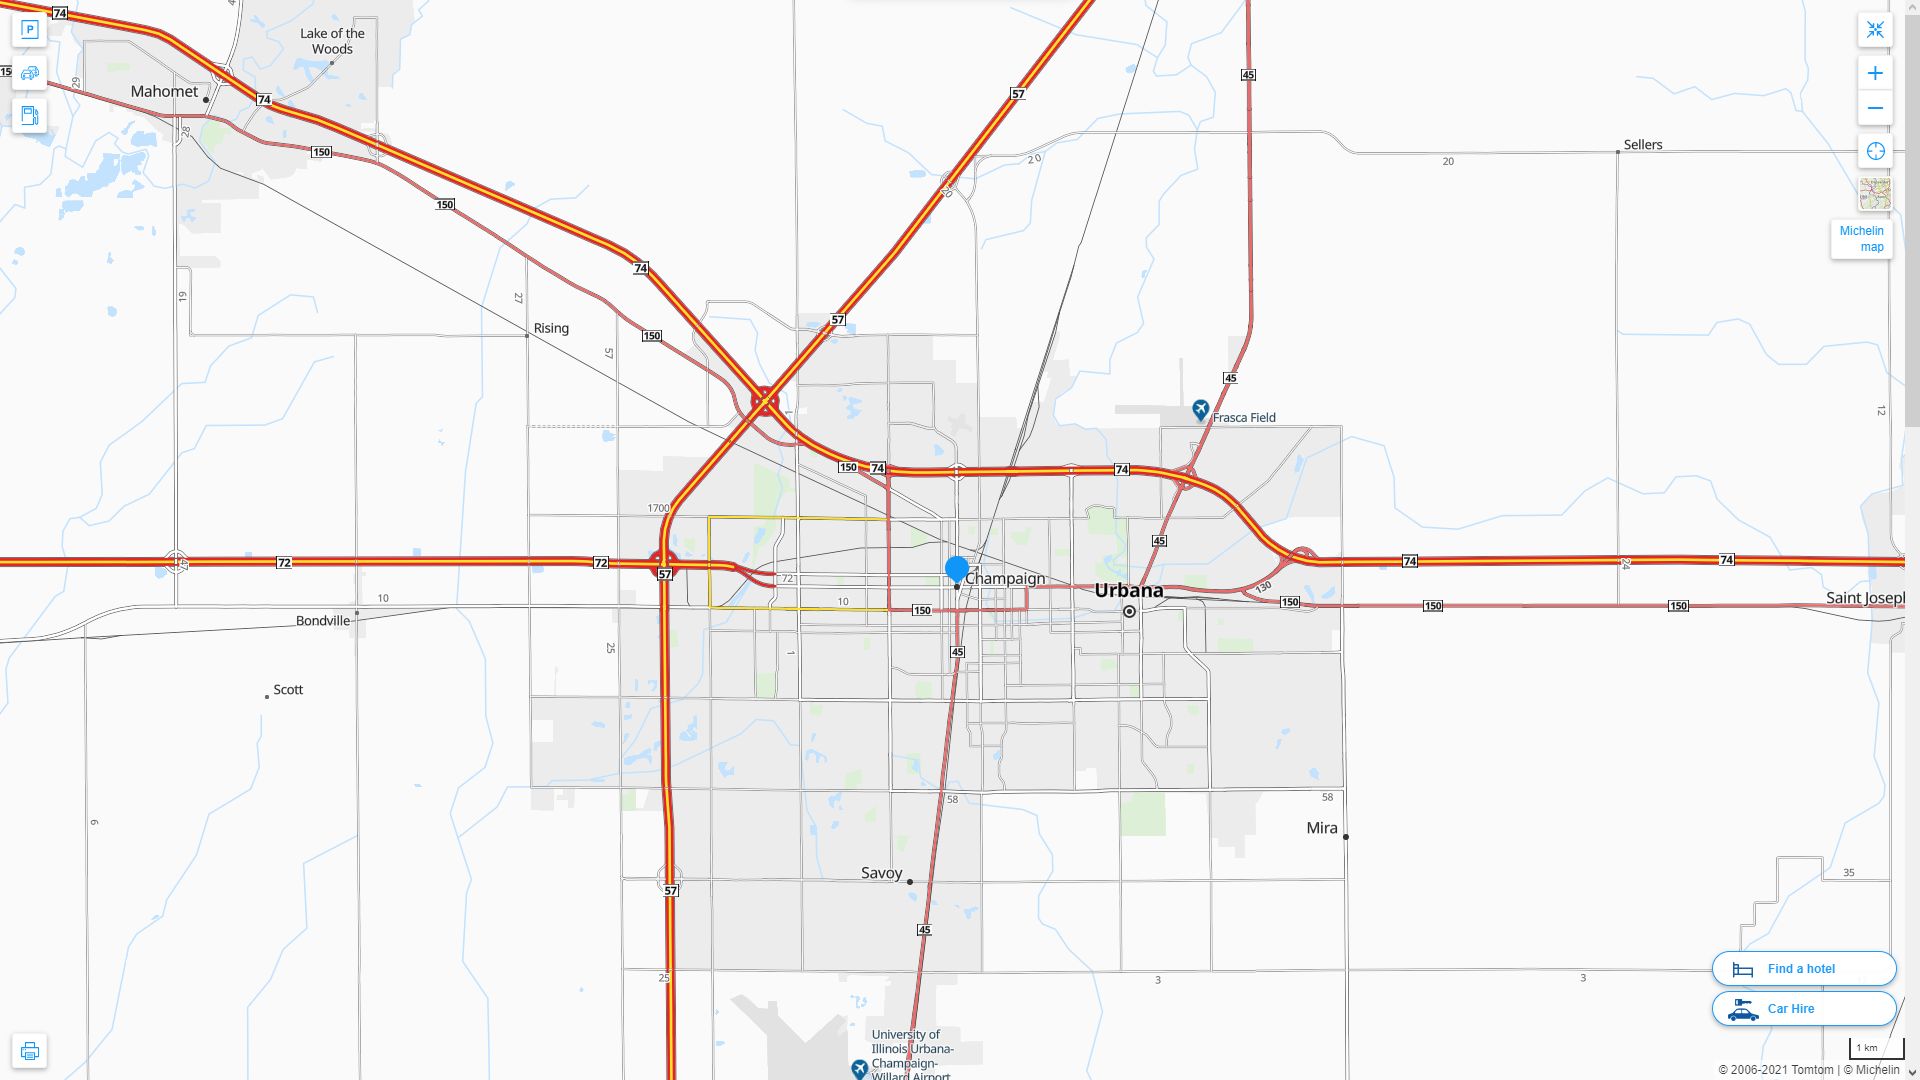 Champaign illinois Highway and Road Map